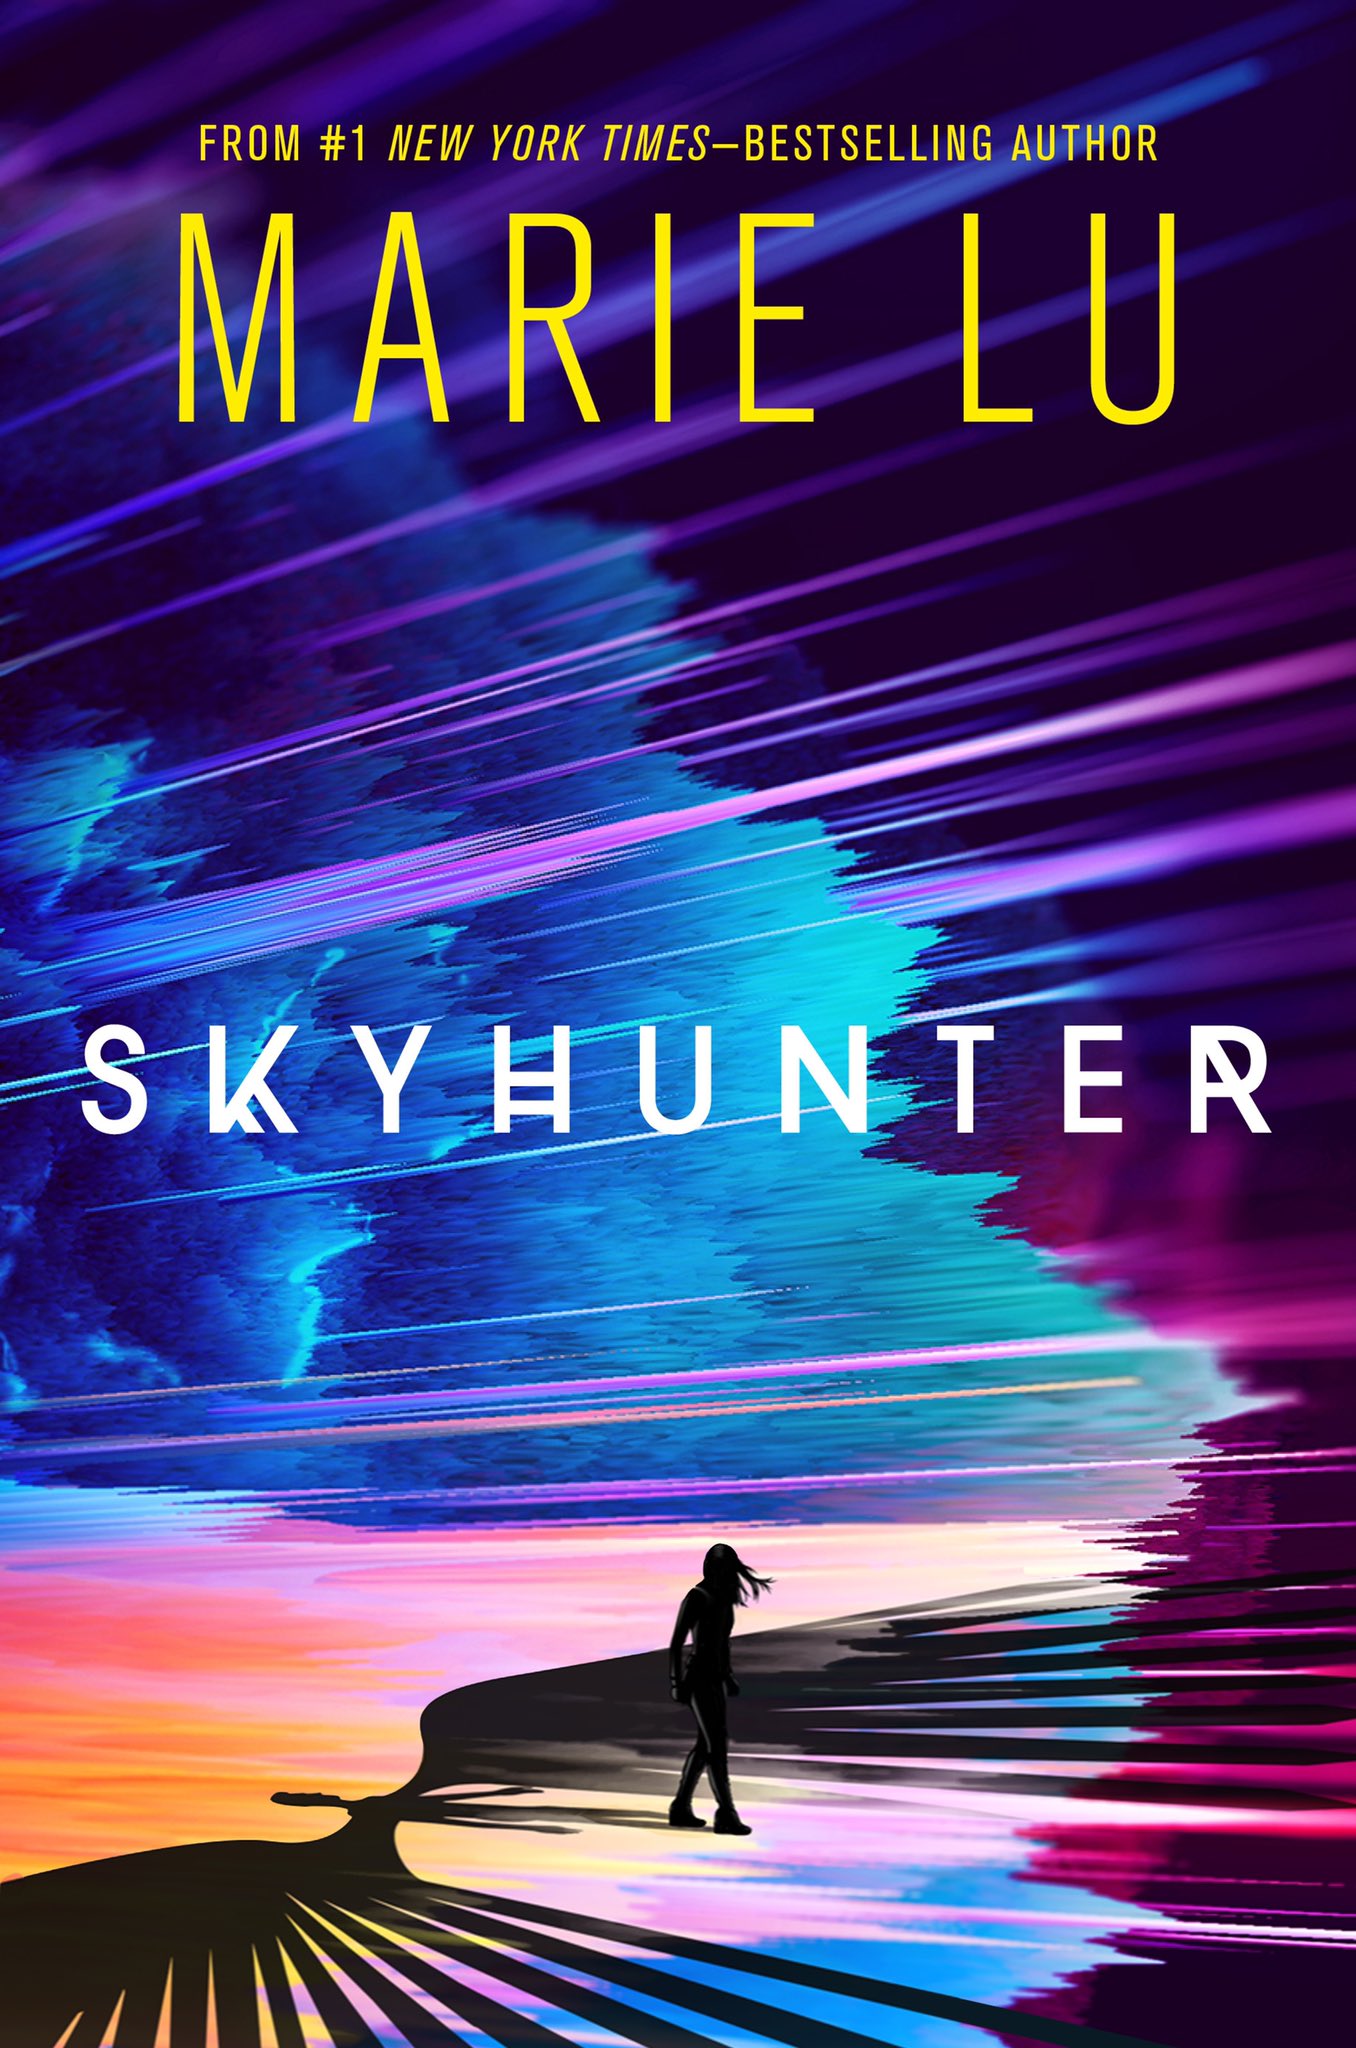 When Does Skyhunter Novel Come Out? Fantasy Book Release Dates